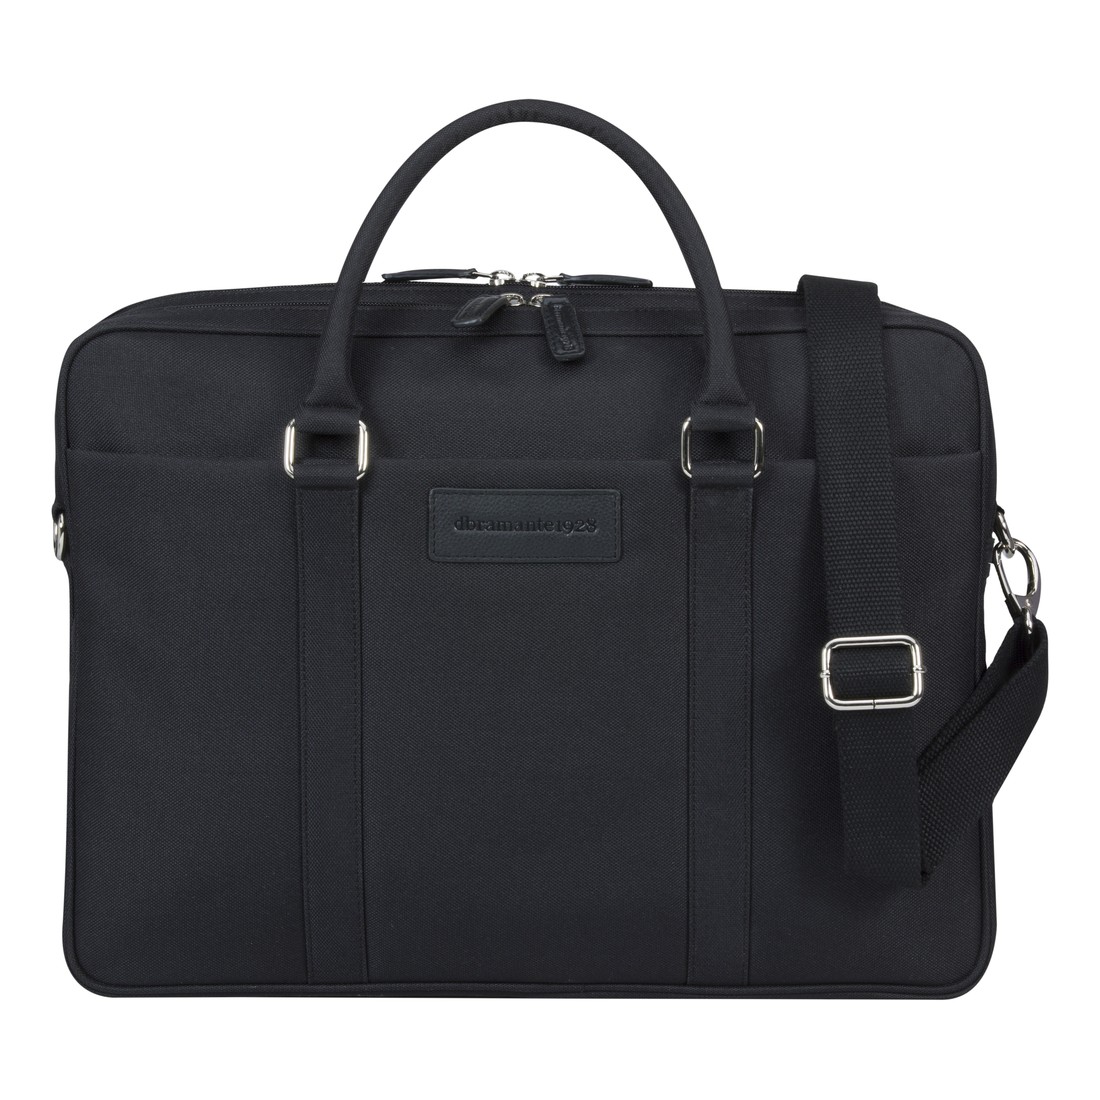 dbramante1928 Ginza 16-inch Duo Pocket Recycled Laptop Bag - Black